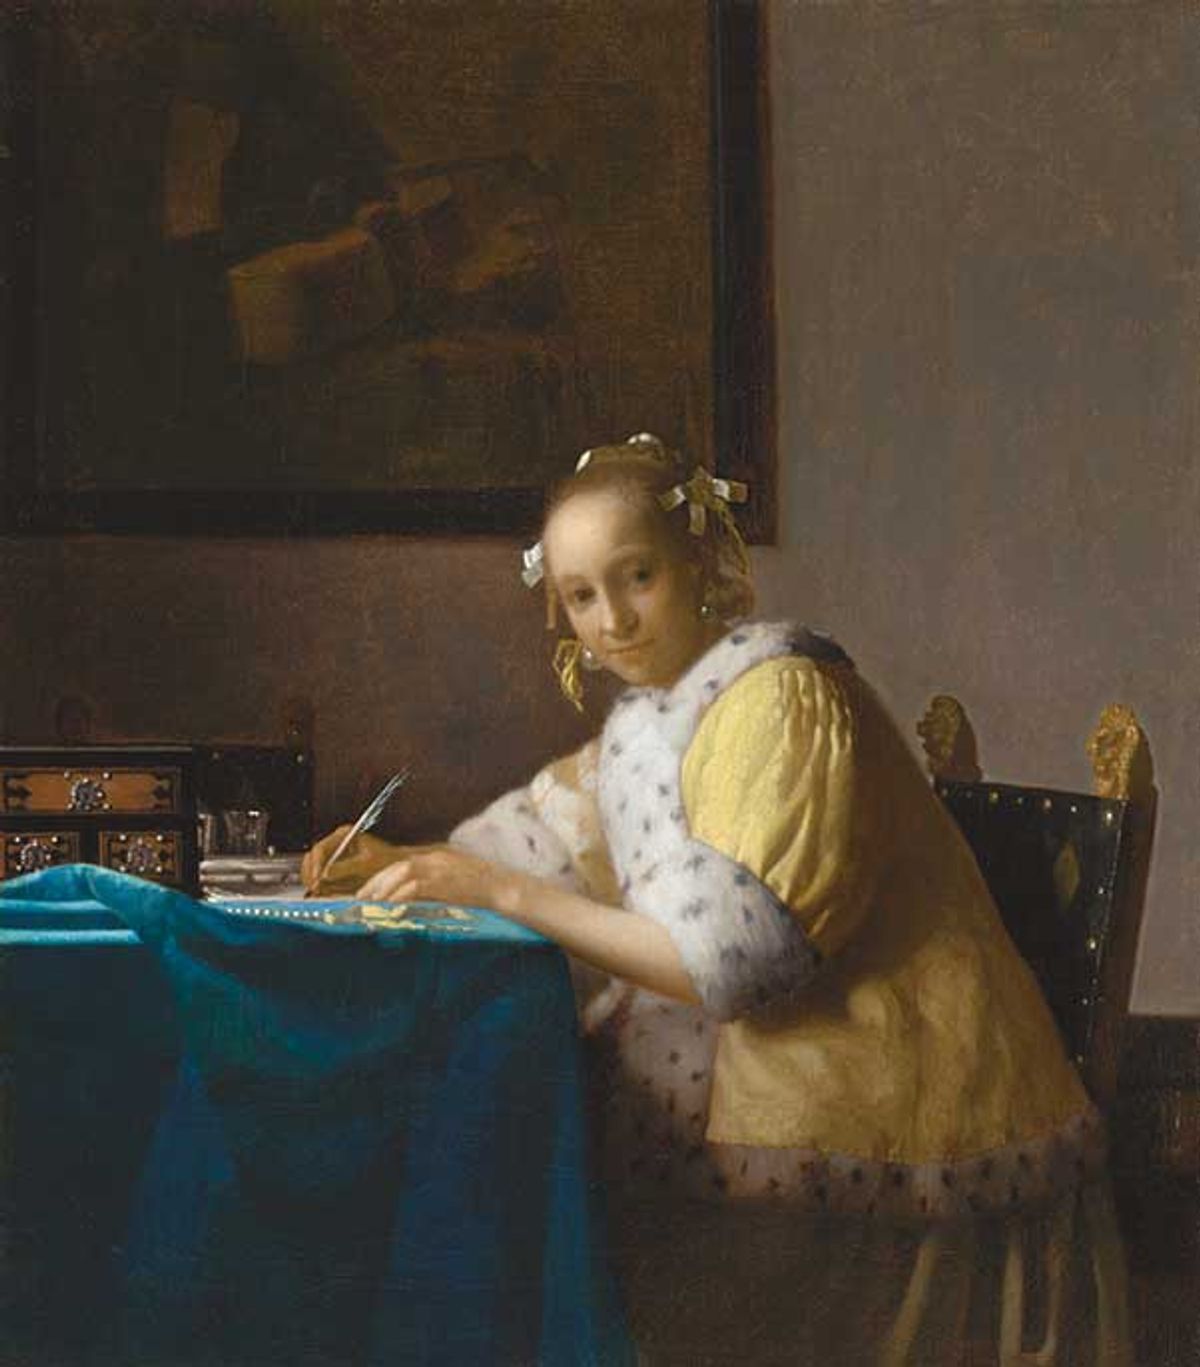 Stoat, squirrel or cat: Johannes Vermeer’s A Lady Writing (1664-67)

National Gallery of Art, Washington



